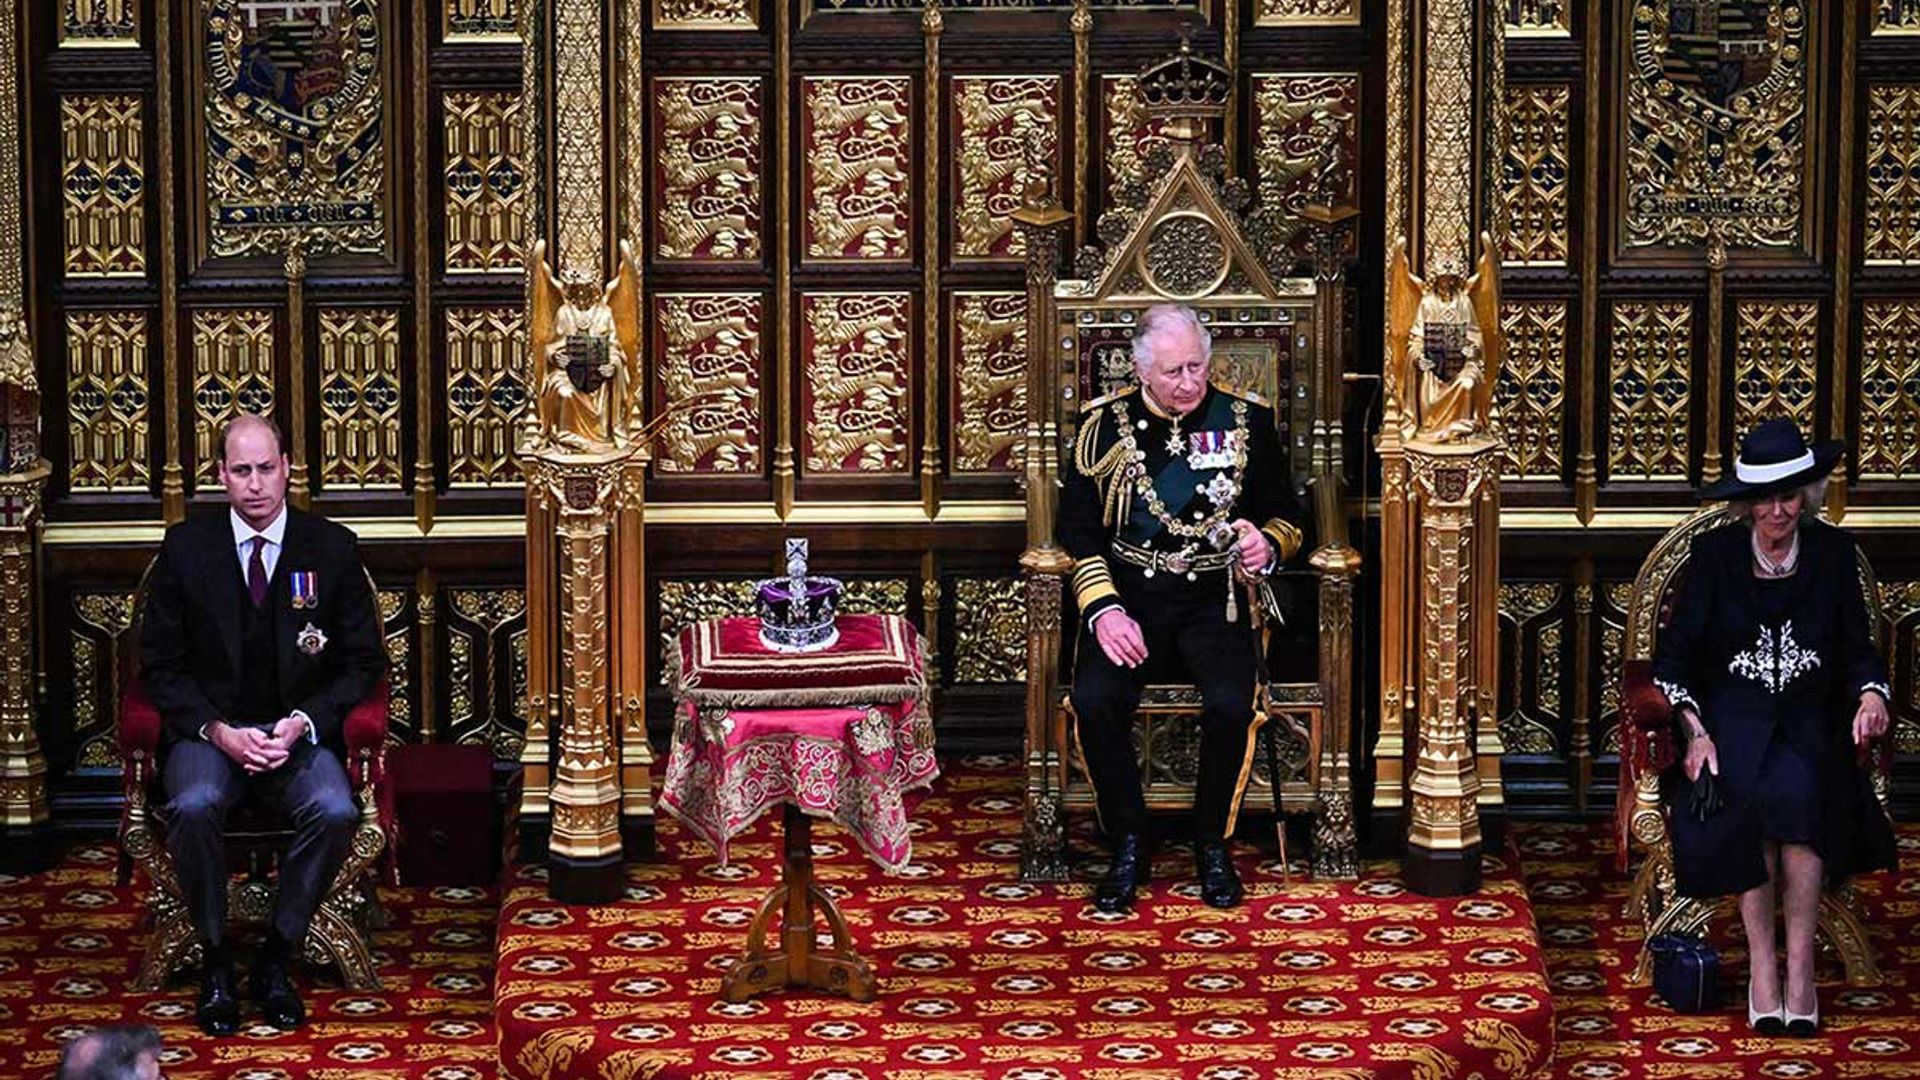 Prince Charles and Prince William step in for the Queen at State Opening of Parliament – best photos